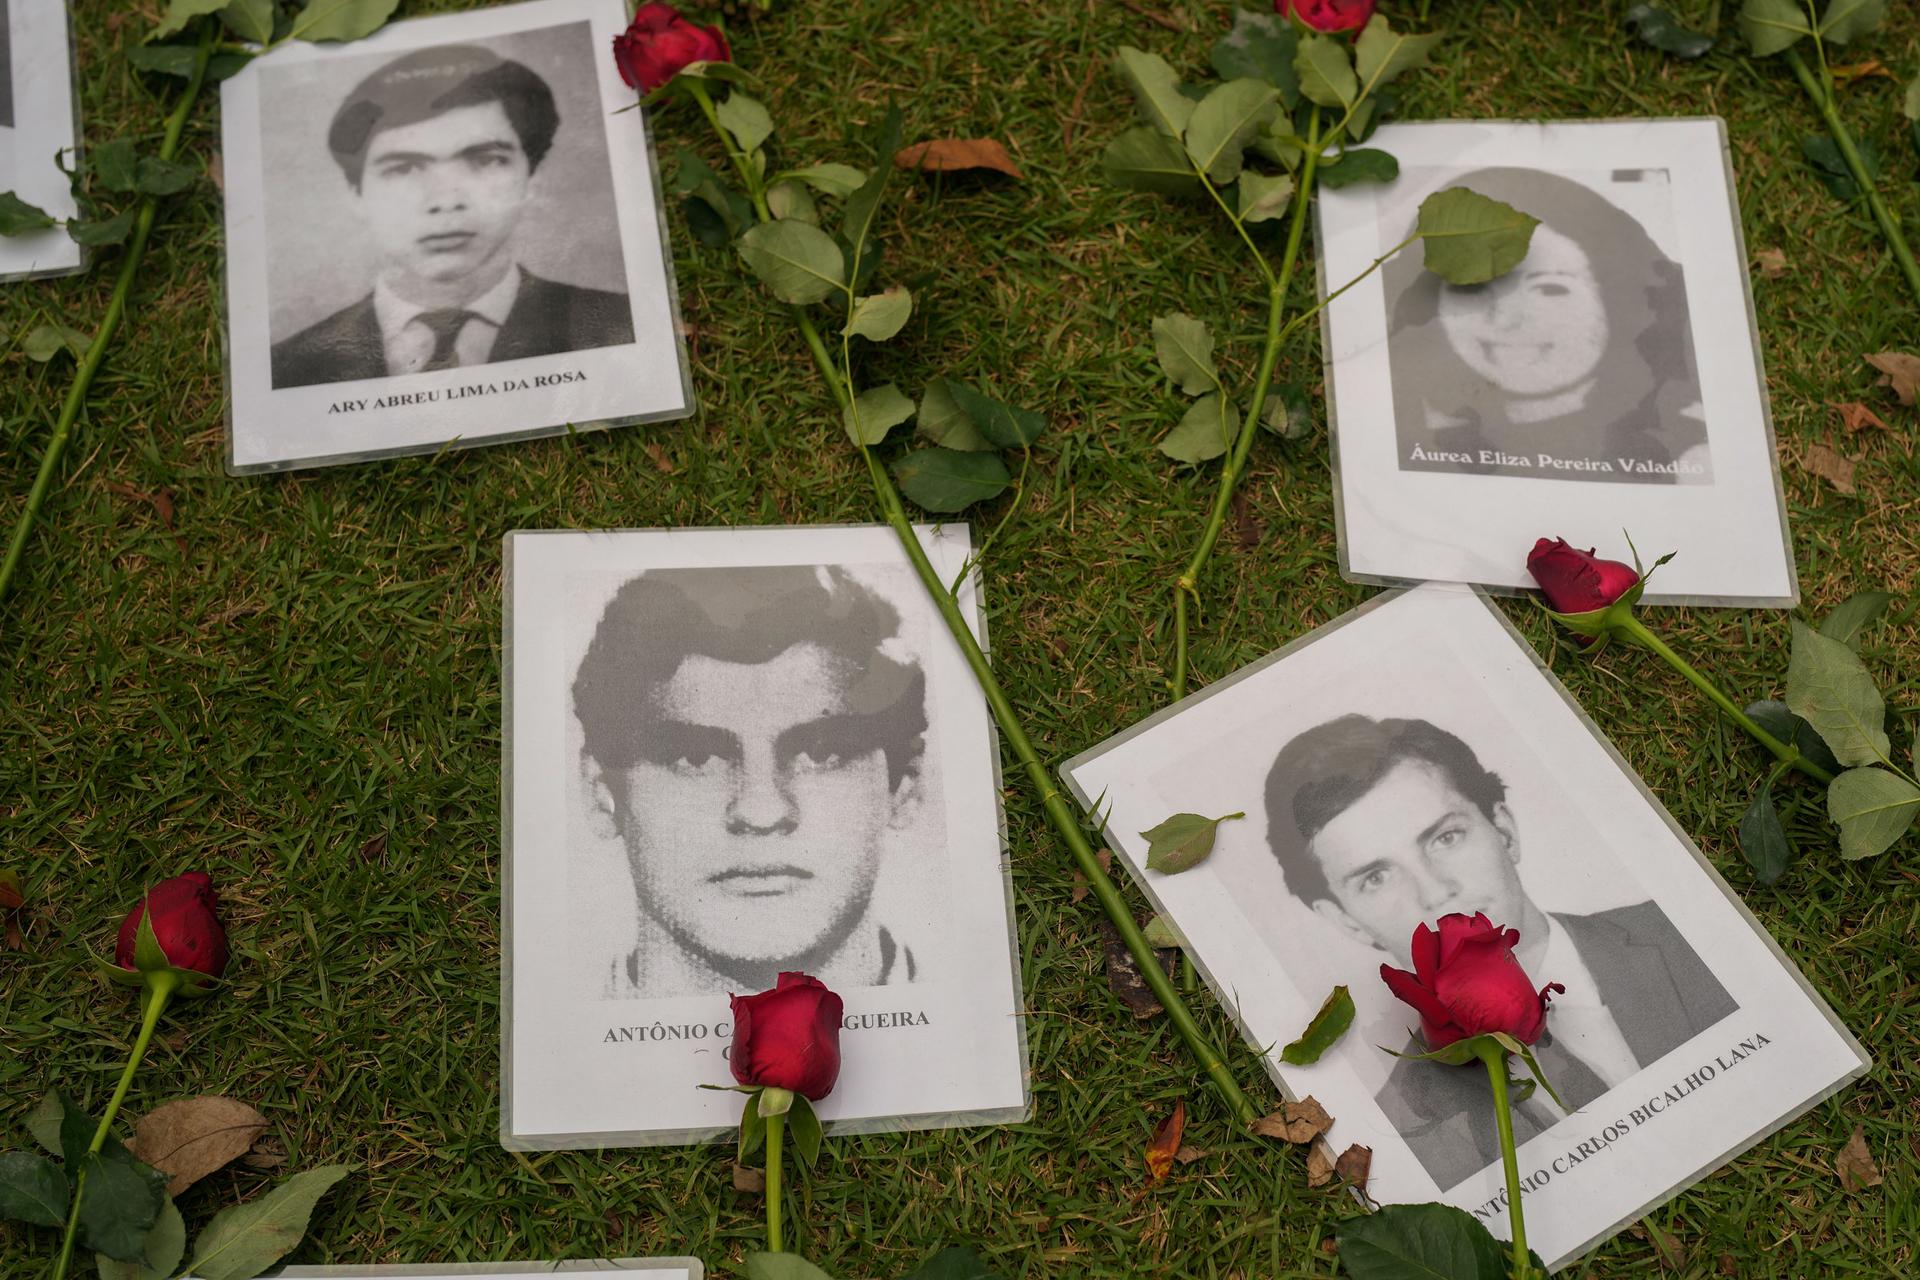 Photos of persons who were killed during Brazil's past dictatorship are placed on the ground during the 